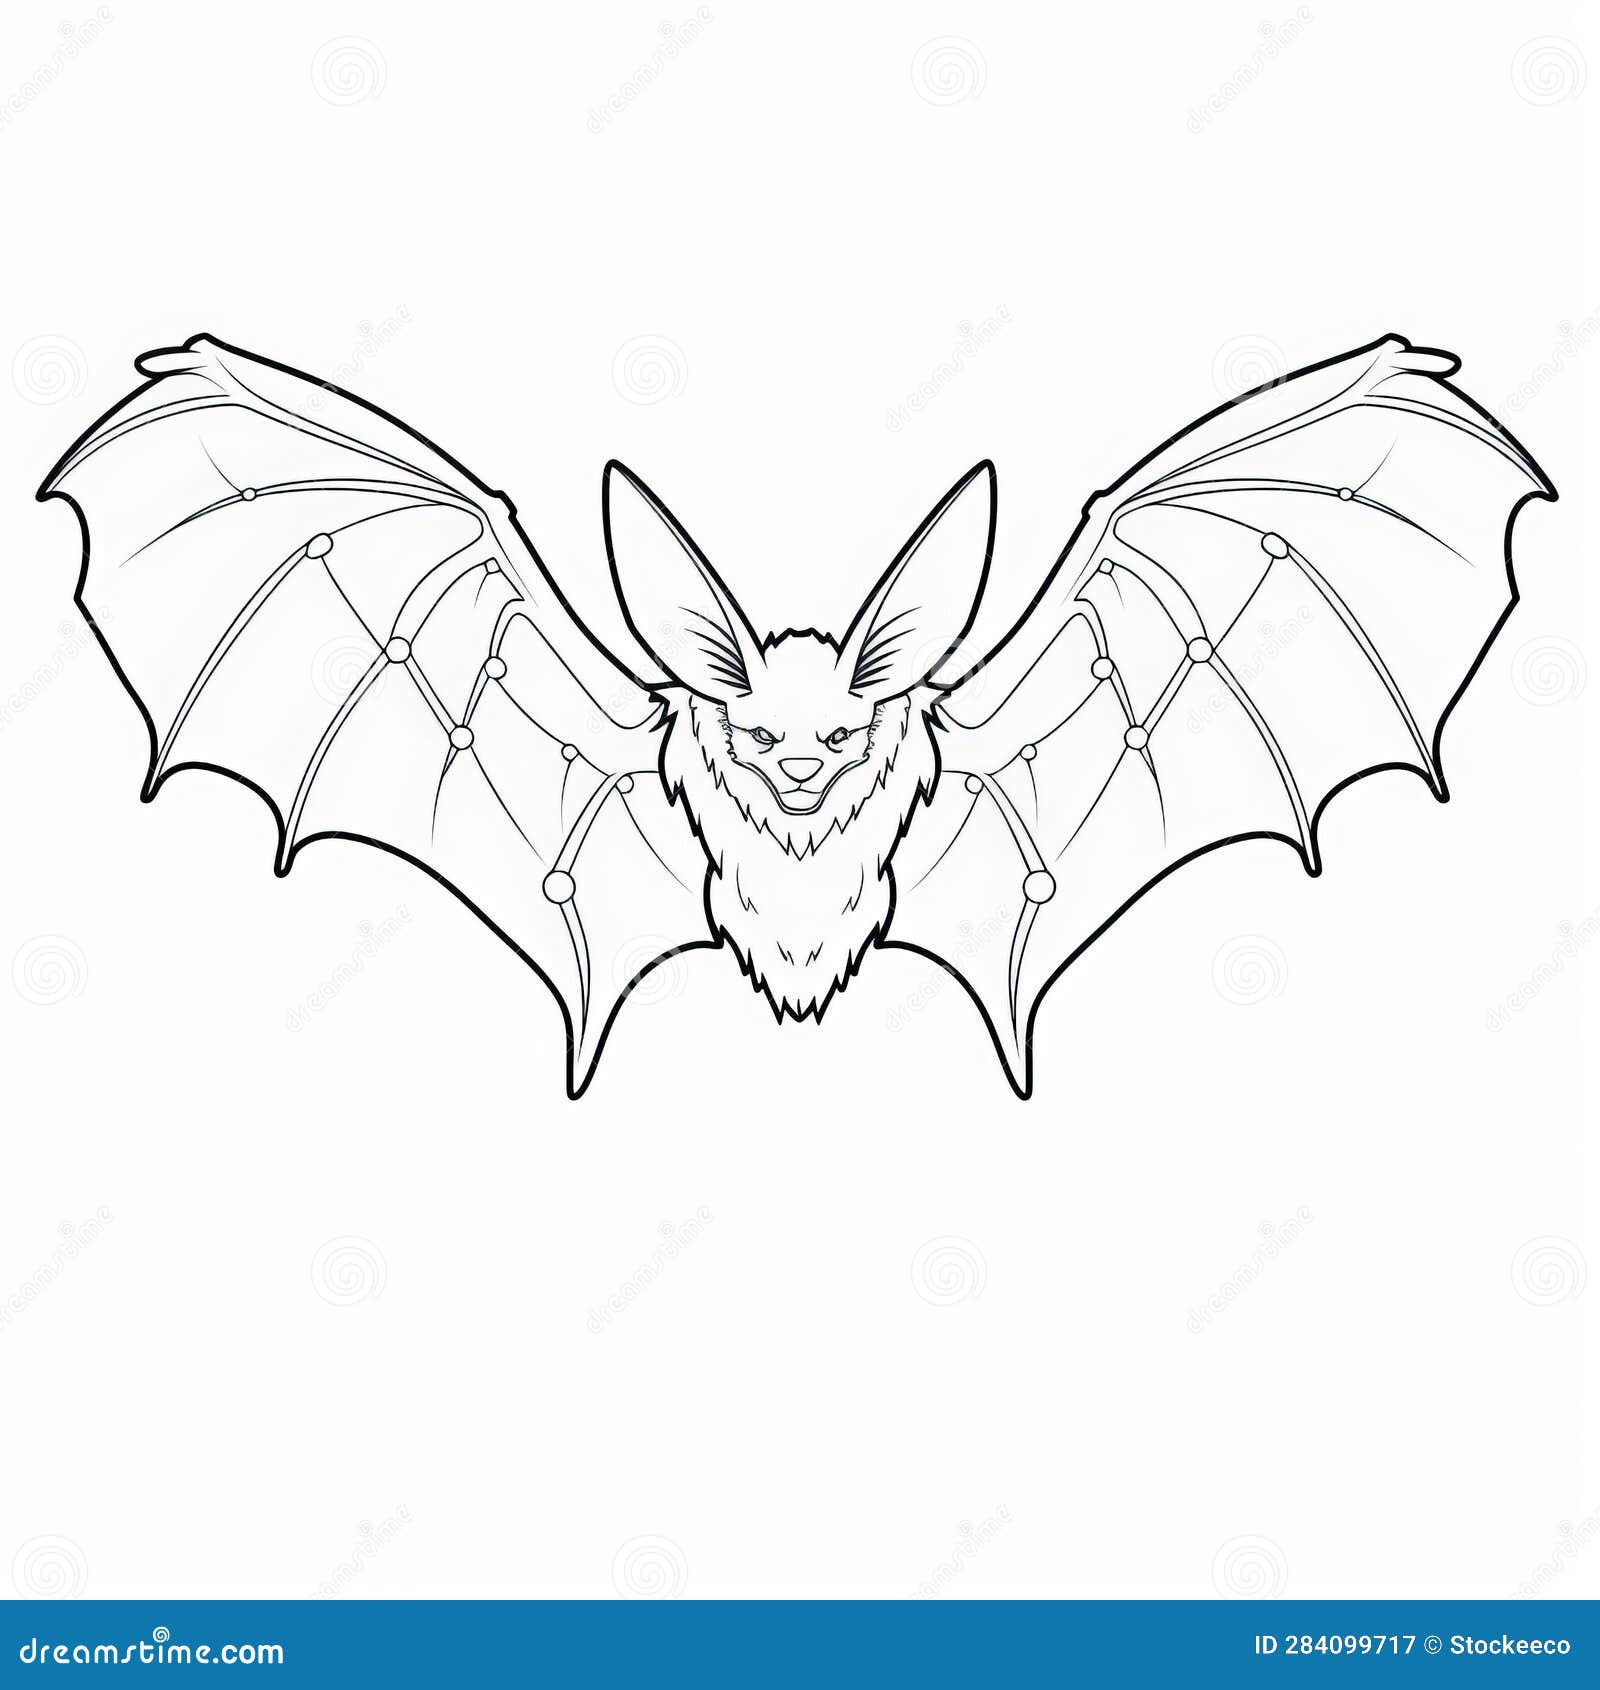 Monochrome bat drawing pages iconic and demonic coloring page stock illustration